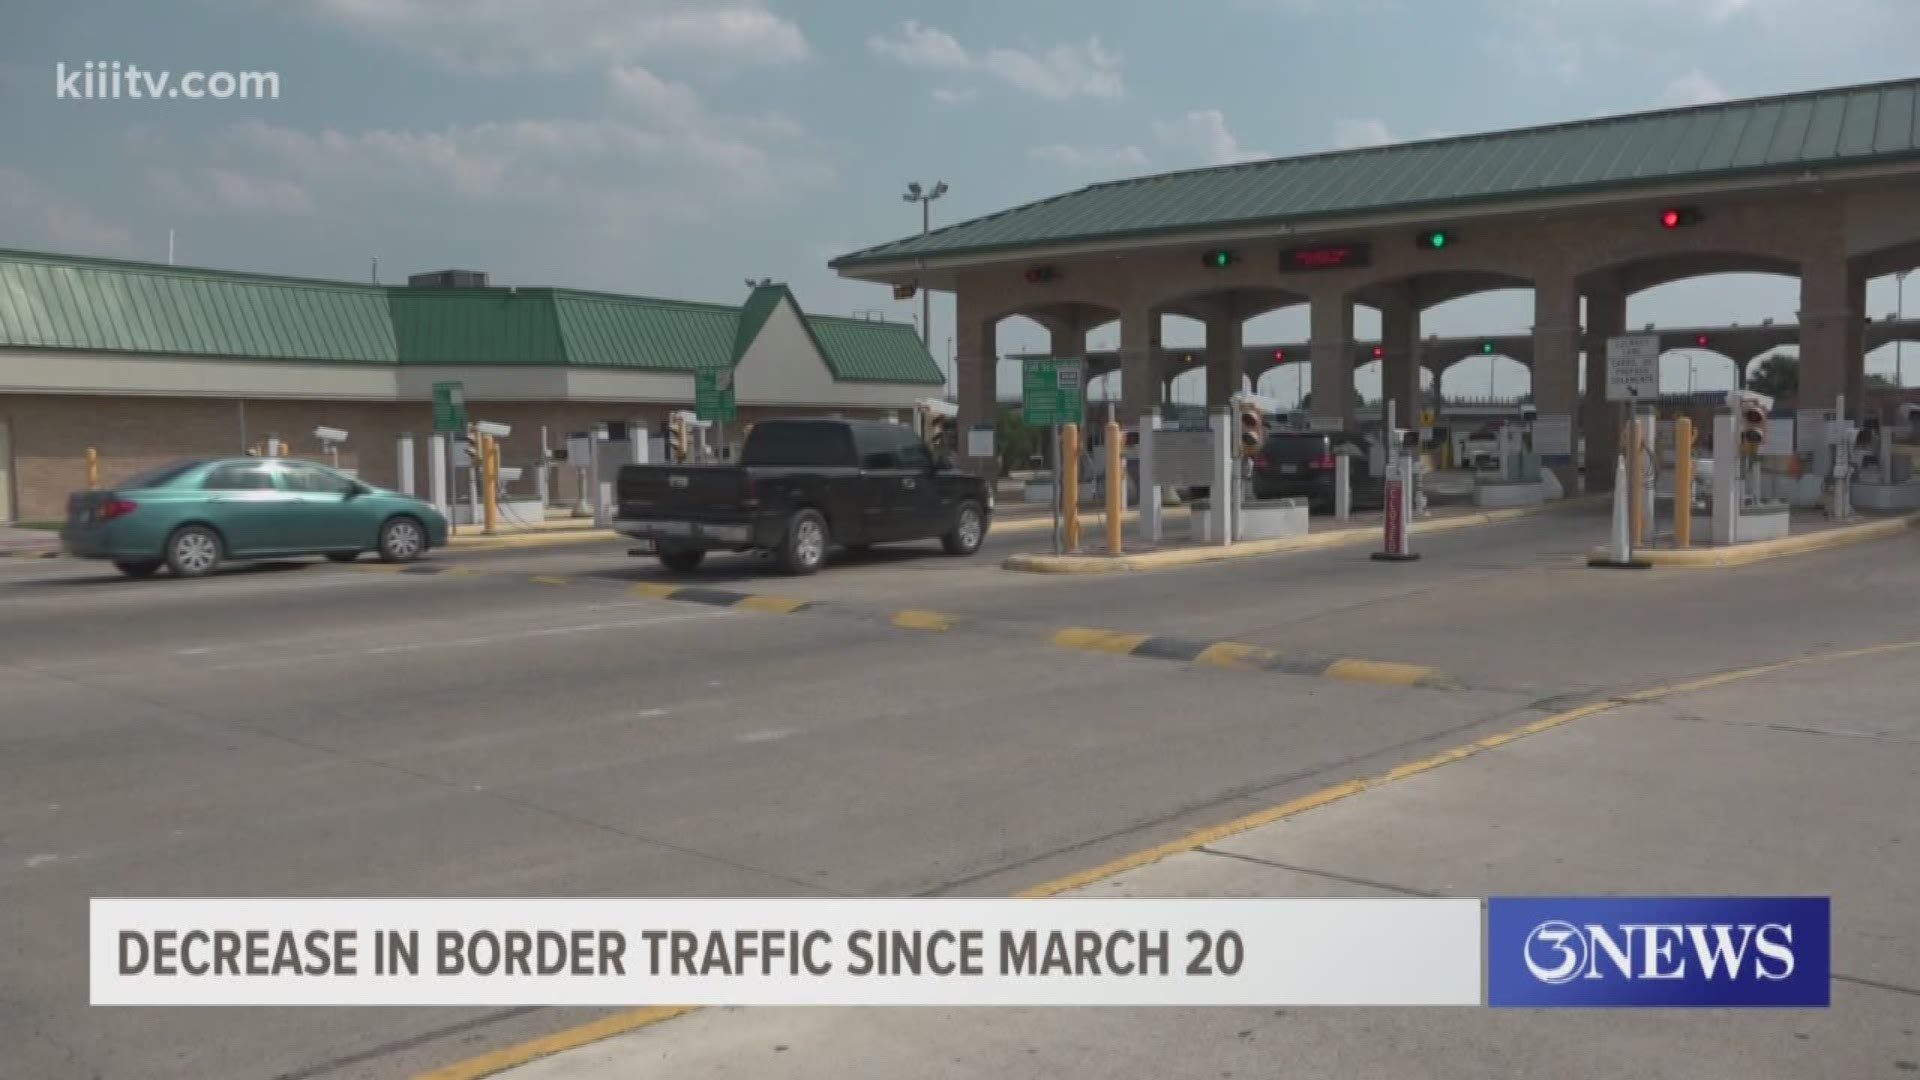 Although there has been a decrease in vehicle and pedestrian traffic at the border people are still crossing the border posing a risk to their communities.